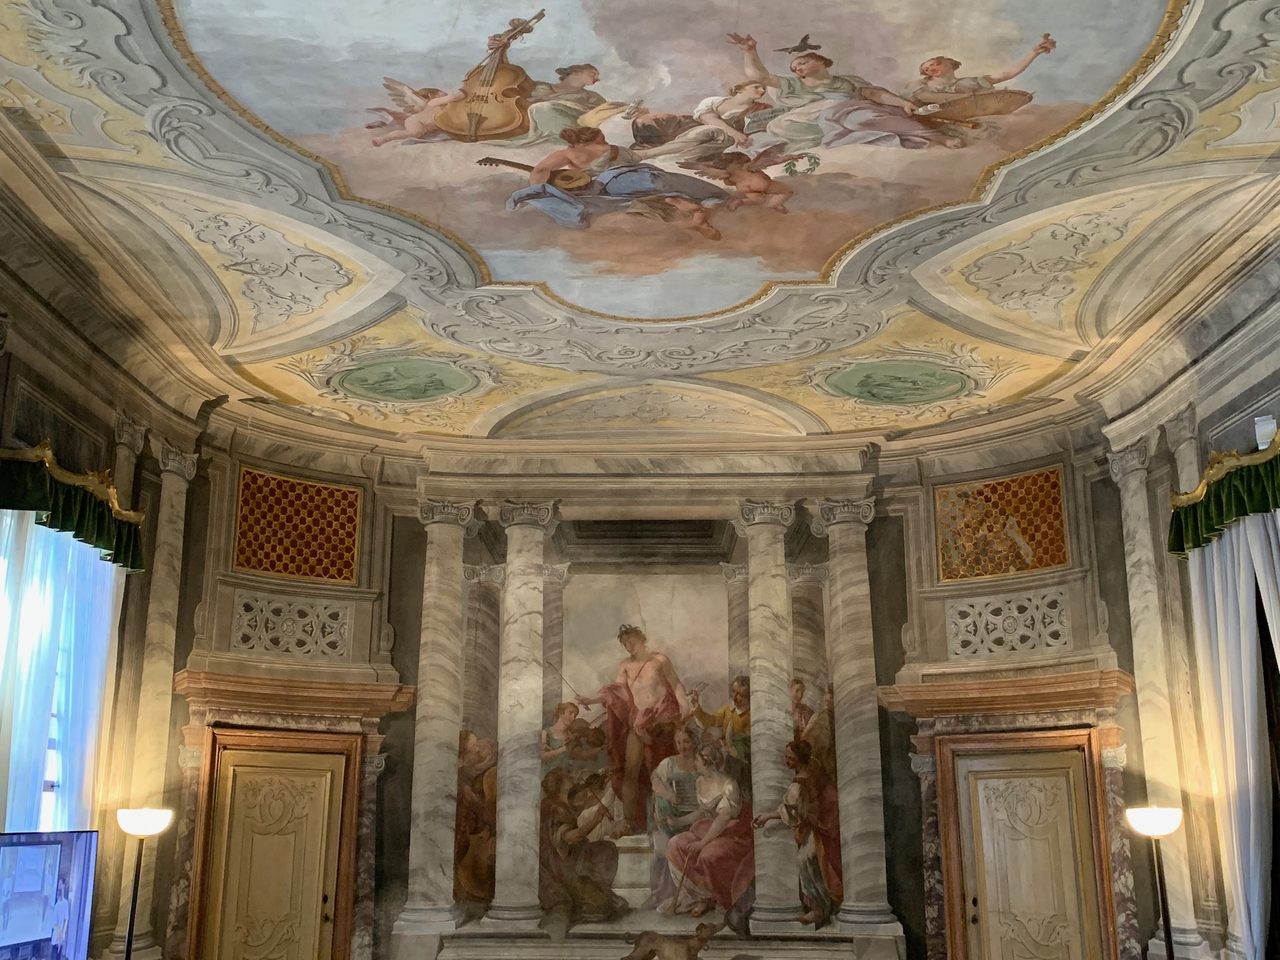 The music room of the Ospedaletto is known for its remarkable acoustics.